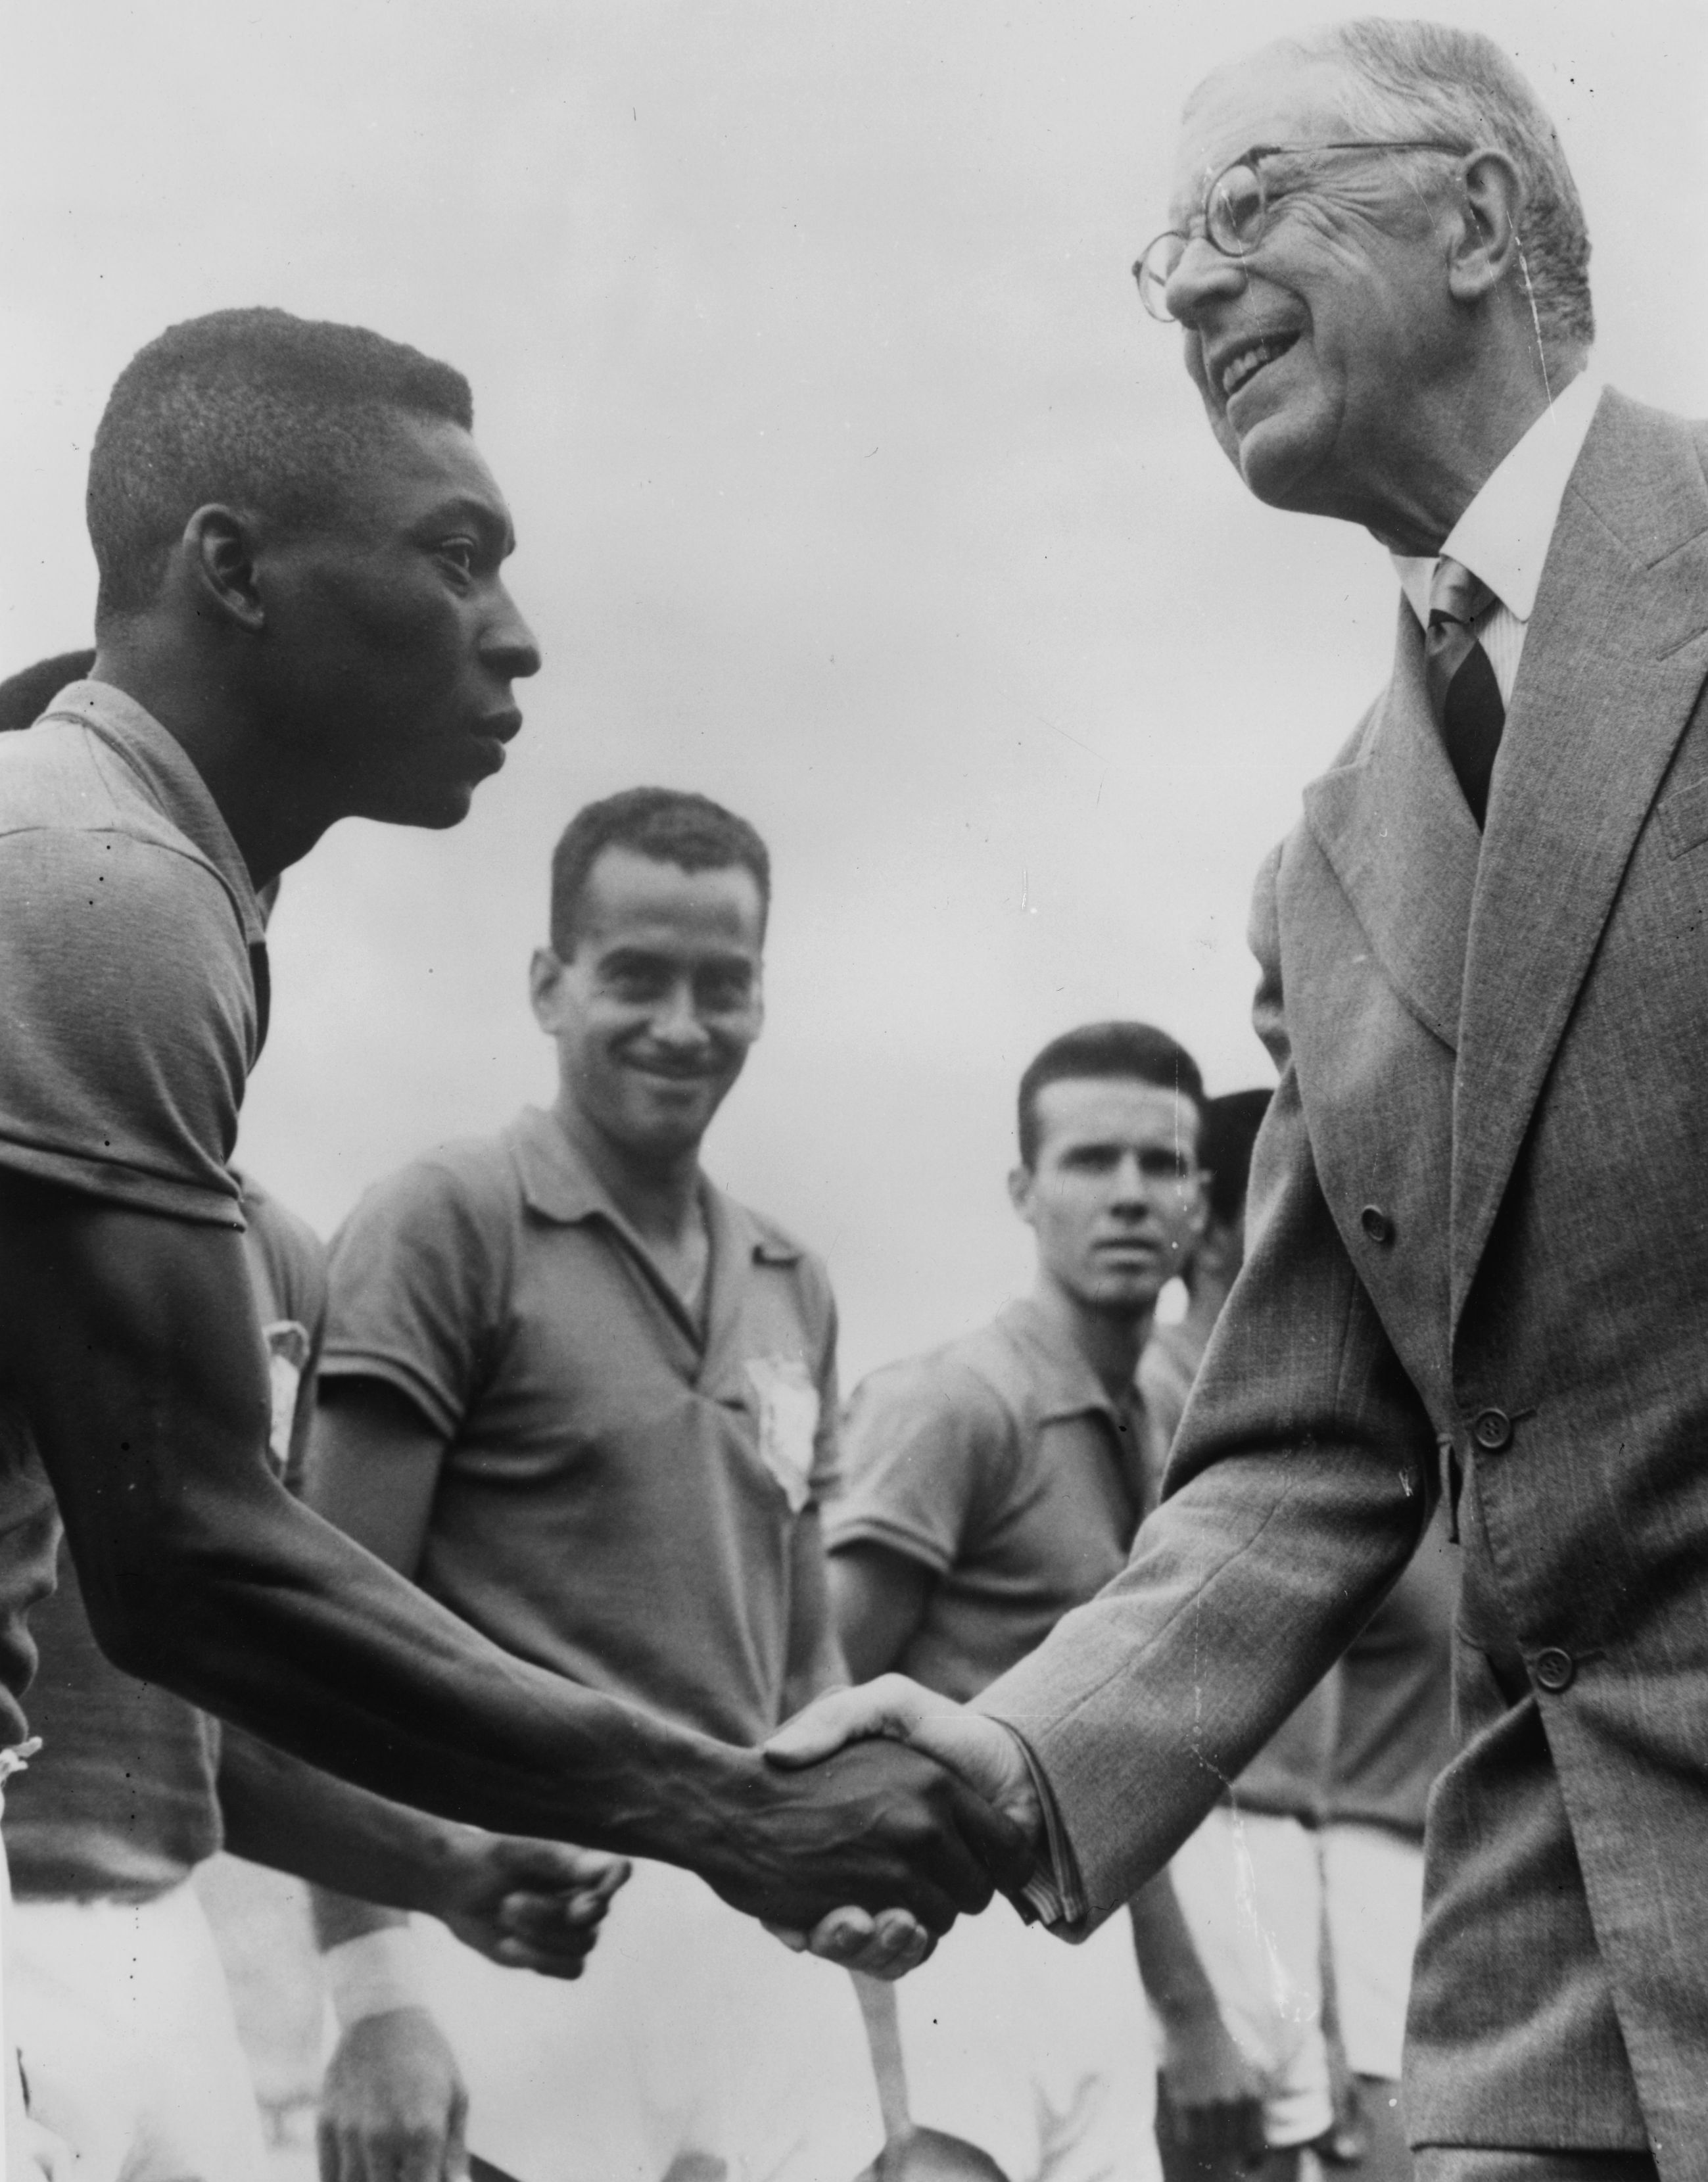 Pele at the 1958 World Cup.